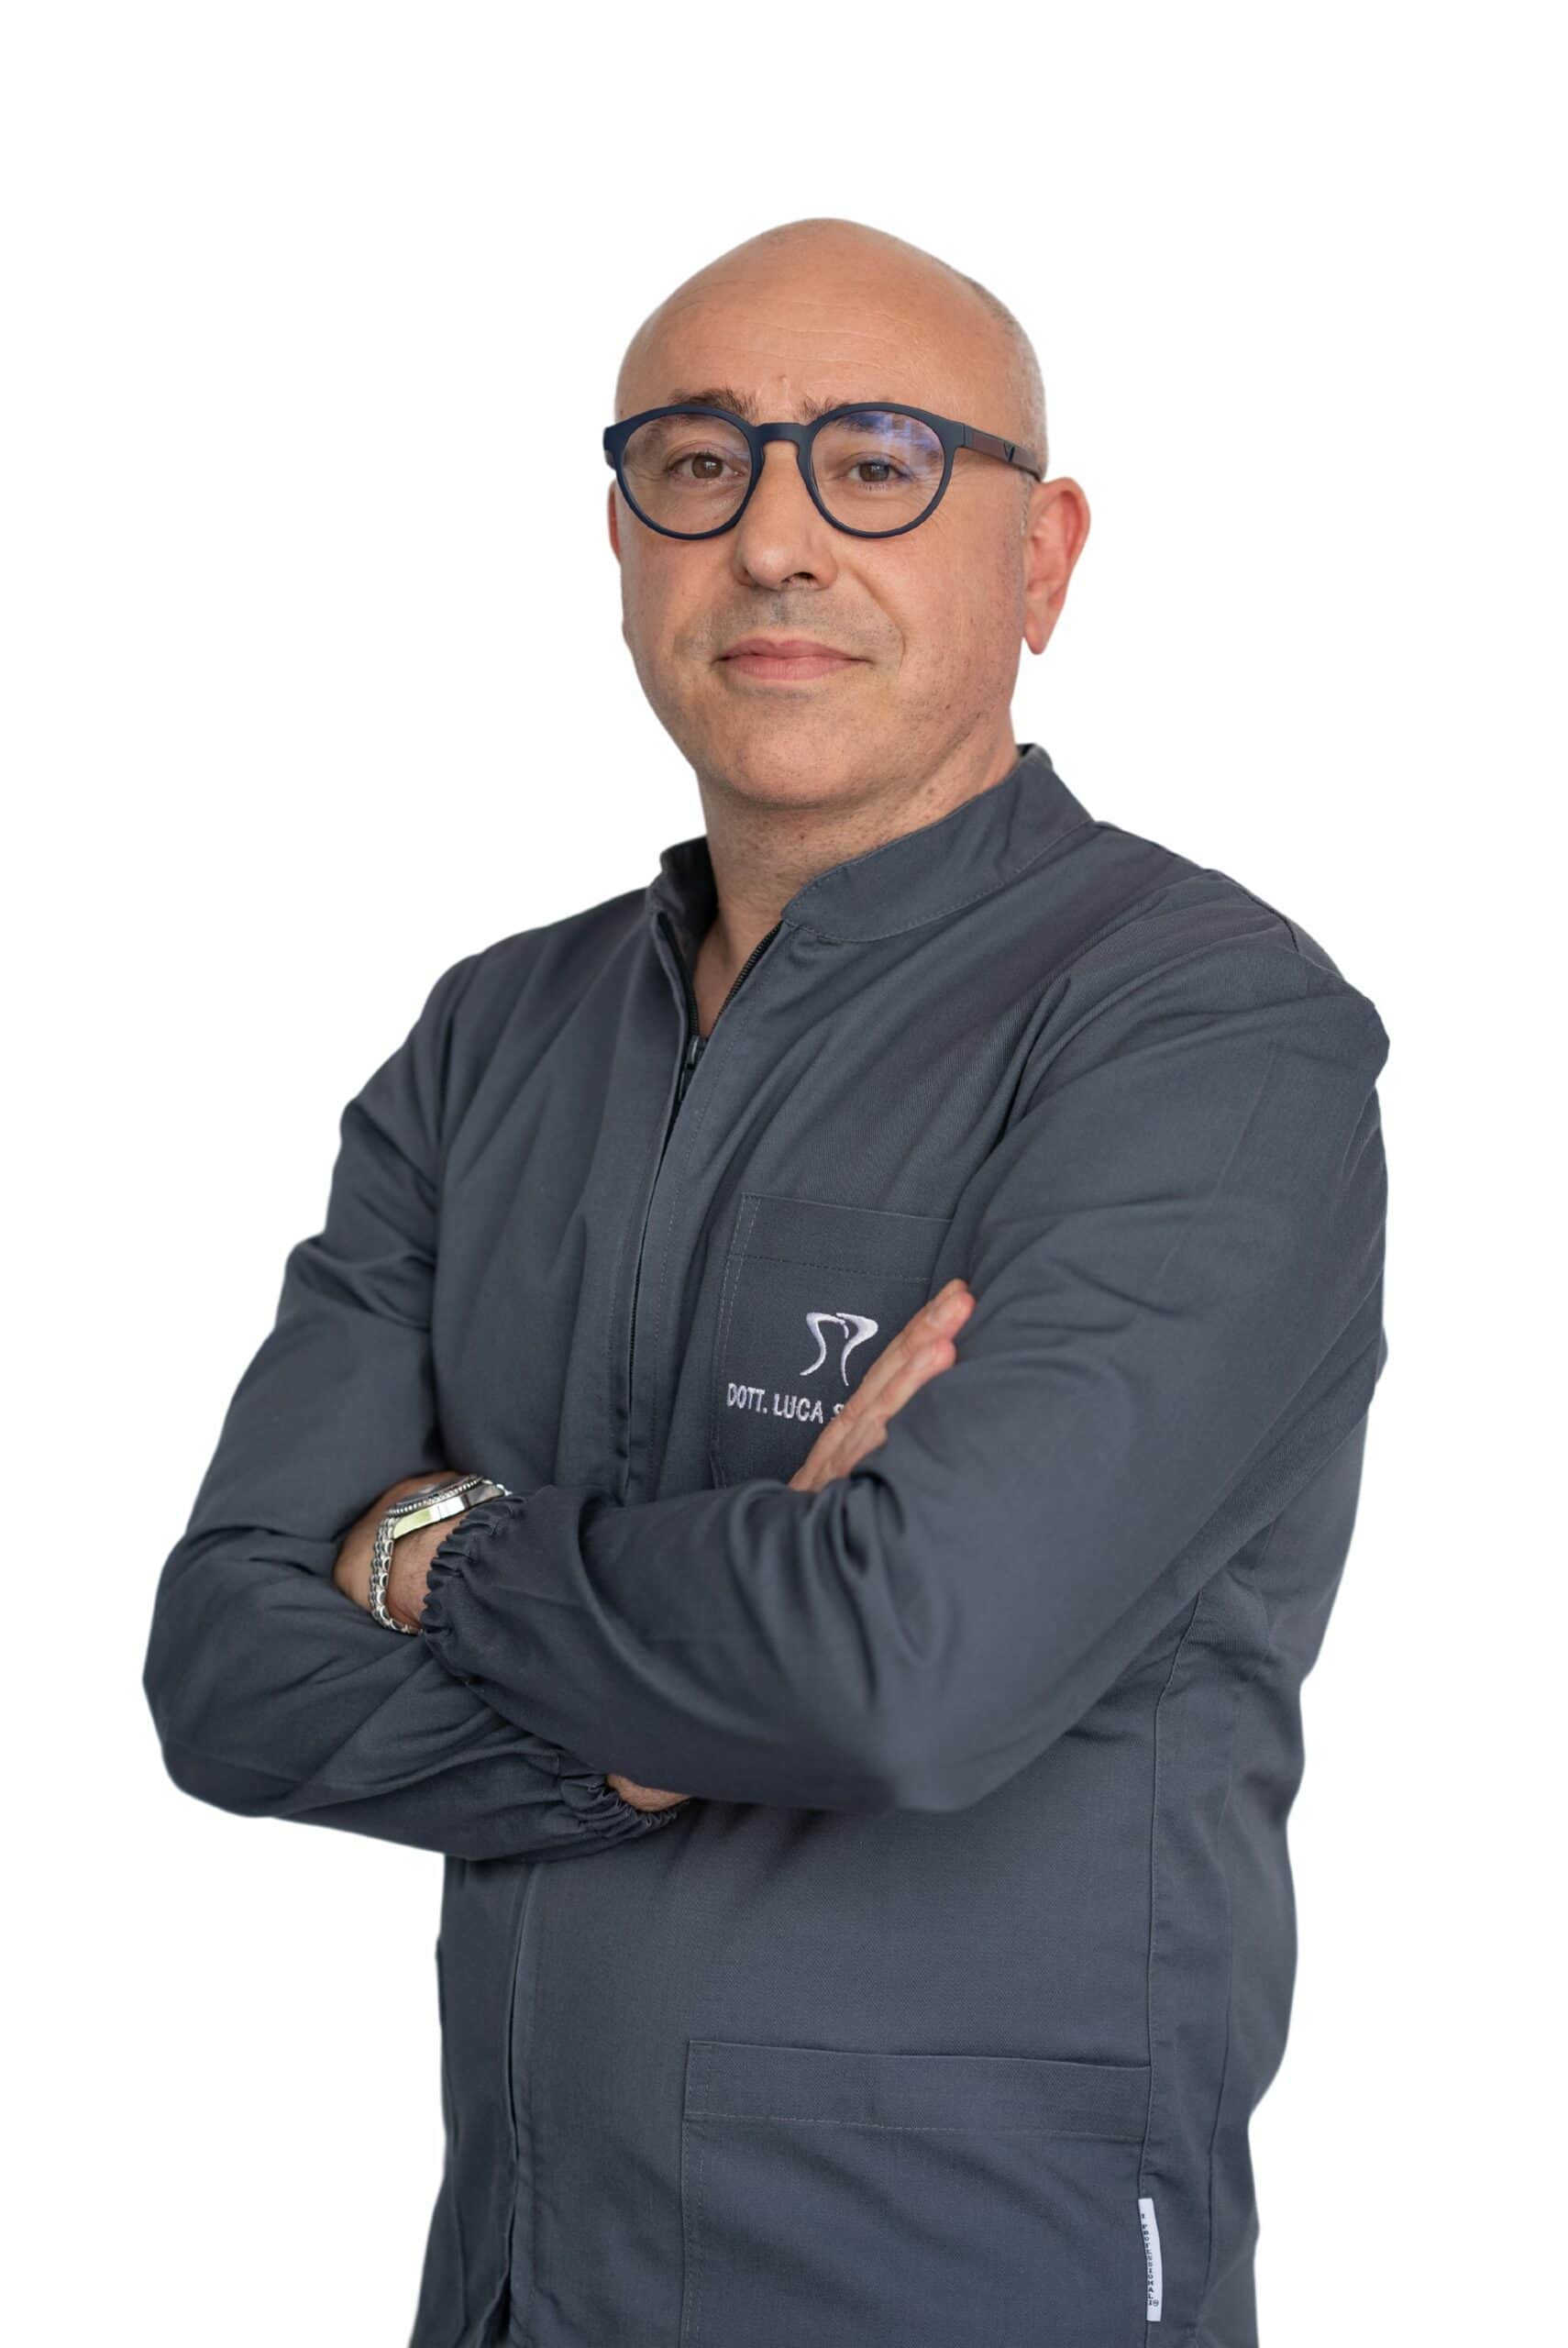 A middle-aged bald man wearing glasses and a gray jacket stands with arms crossed, looking at the camera against a white background, representing Dental@Med Group.